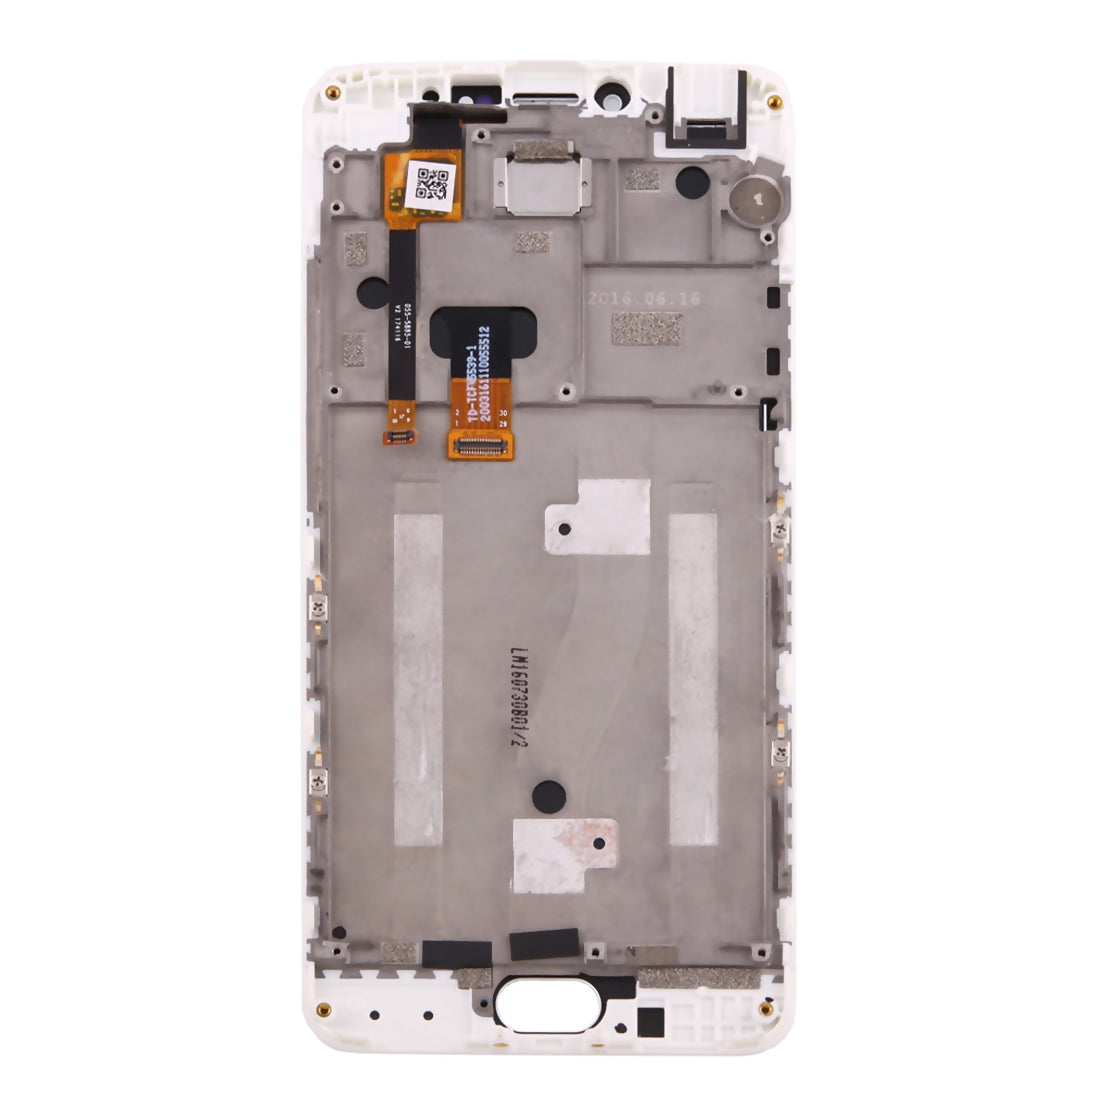 Ecran LCD + Tactile + Châssis Meizu M3 Note Meilan Note 3 (Version Chinoise) Blanc